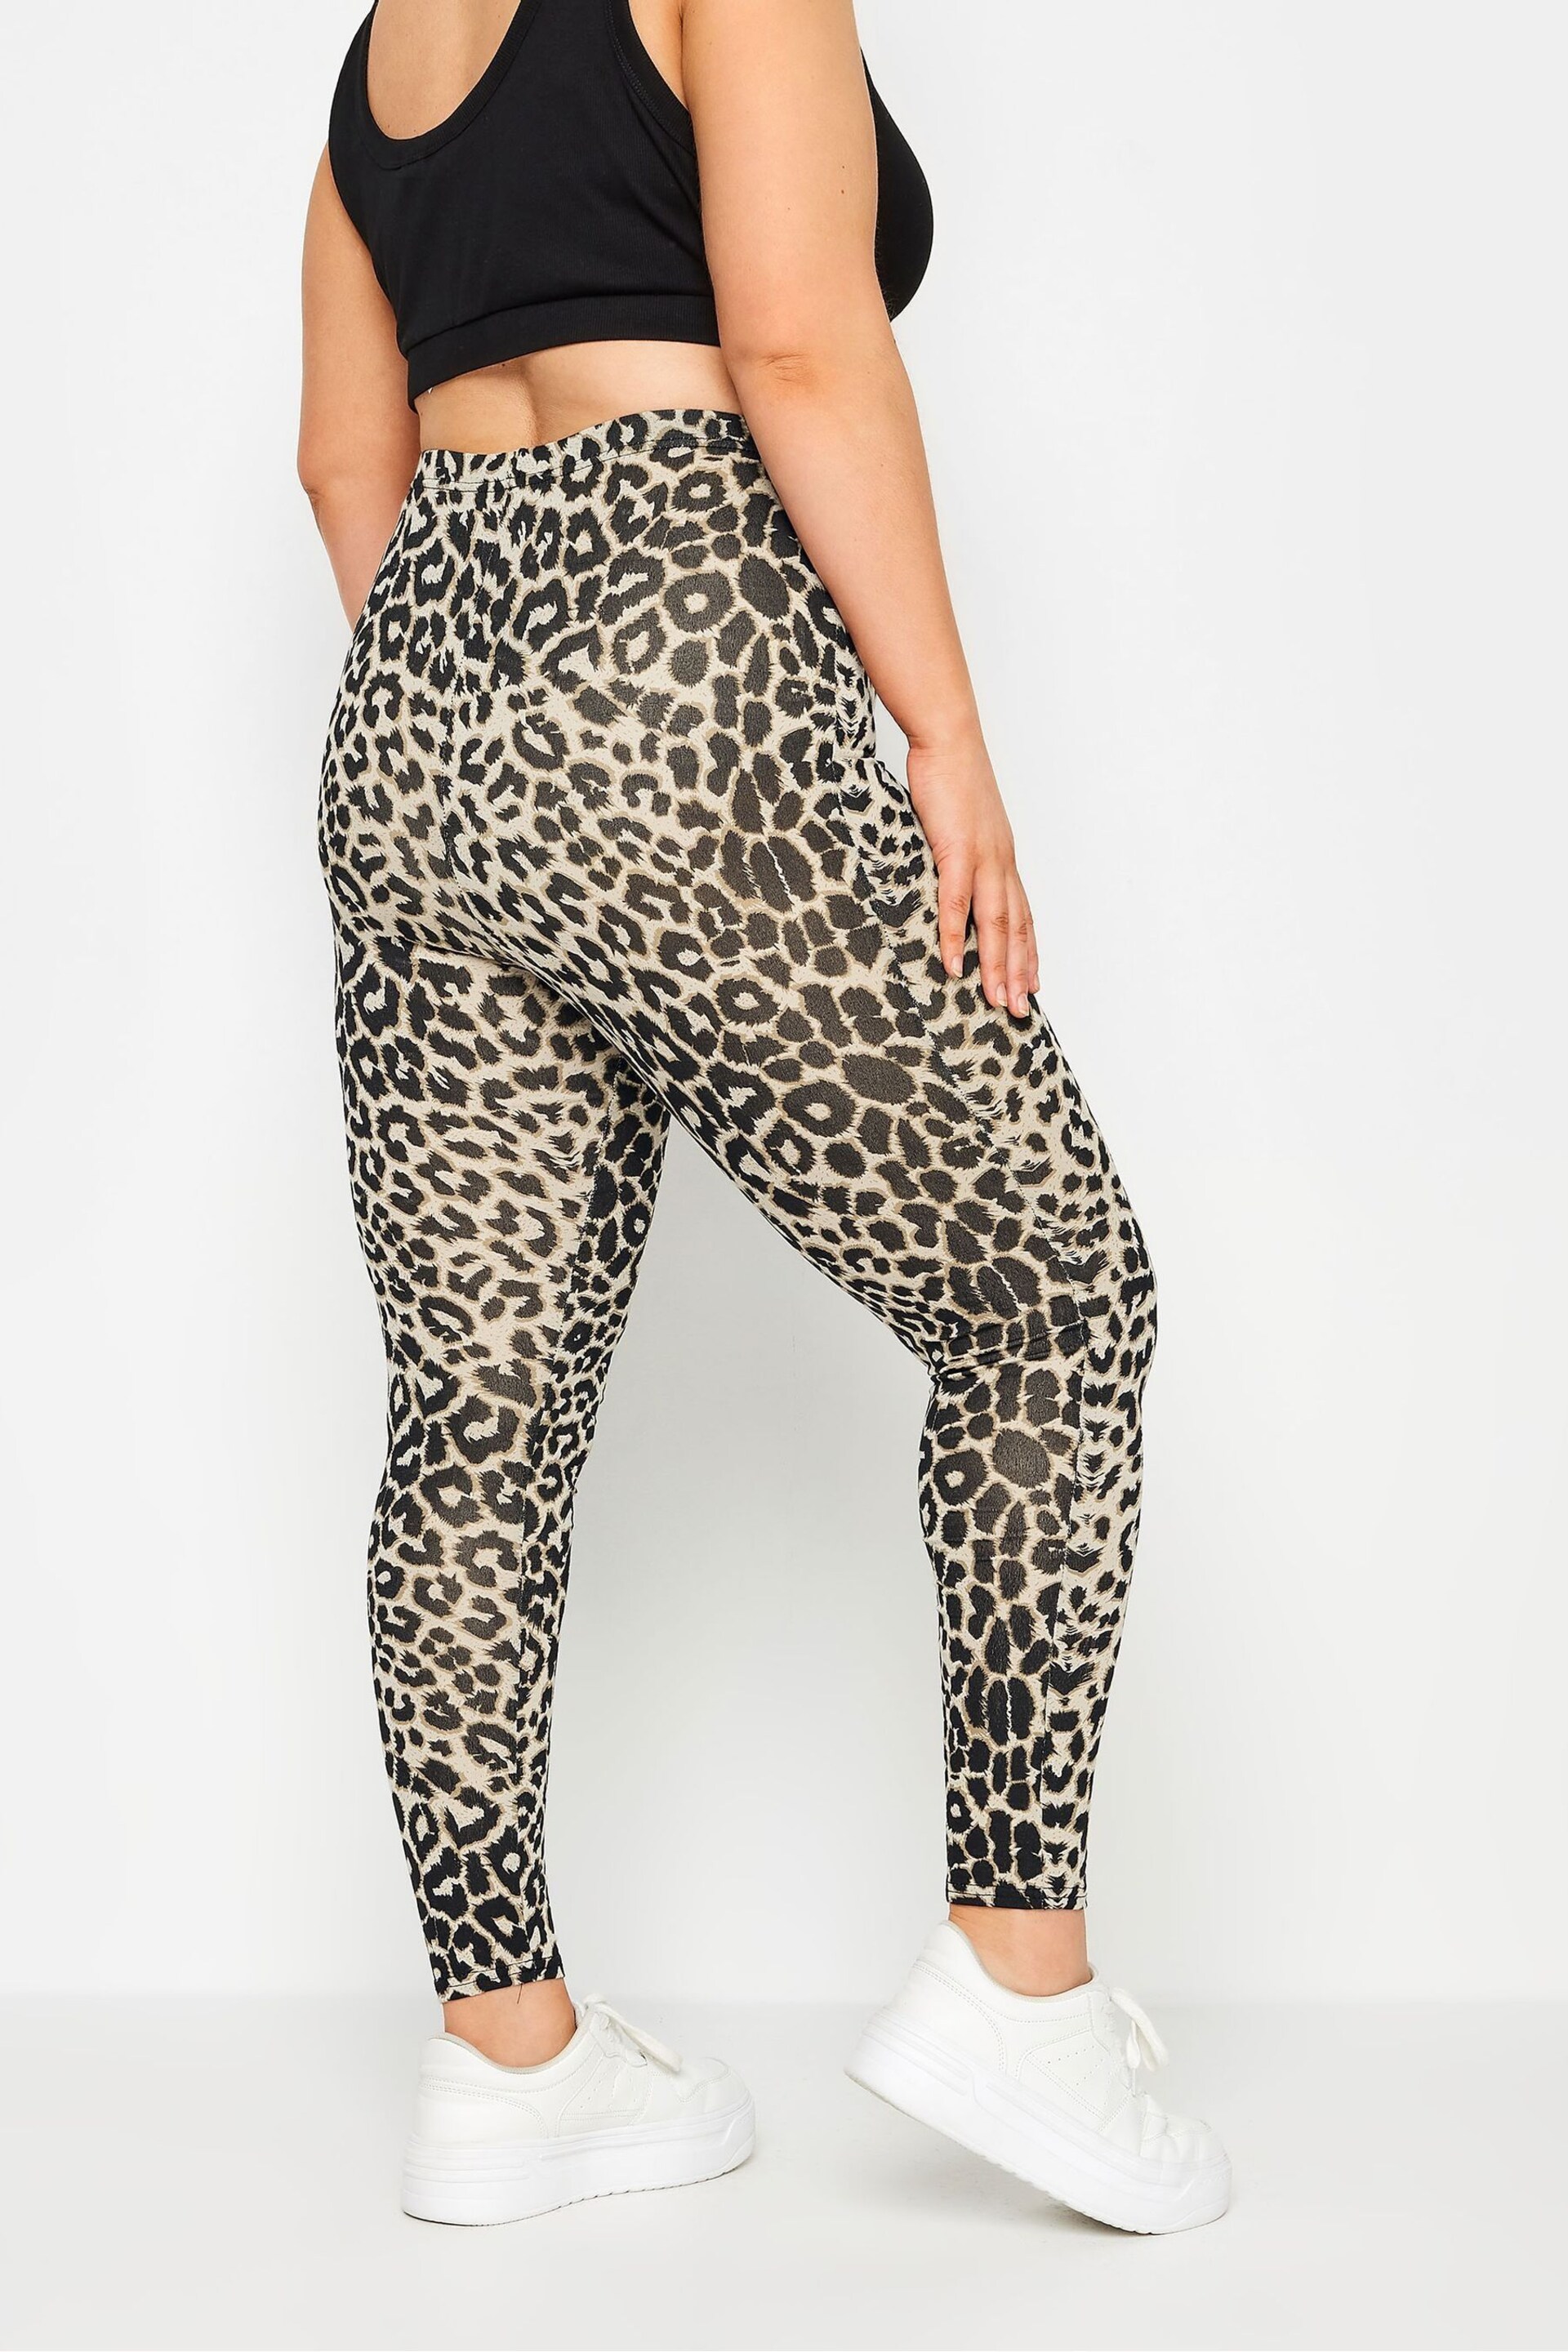 Yours Curve Black Limited Leopard Print Leggings - Image 3 of 5